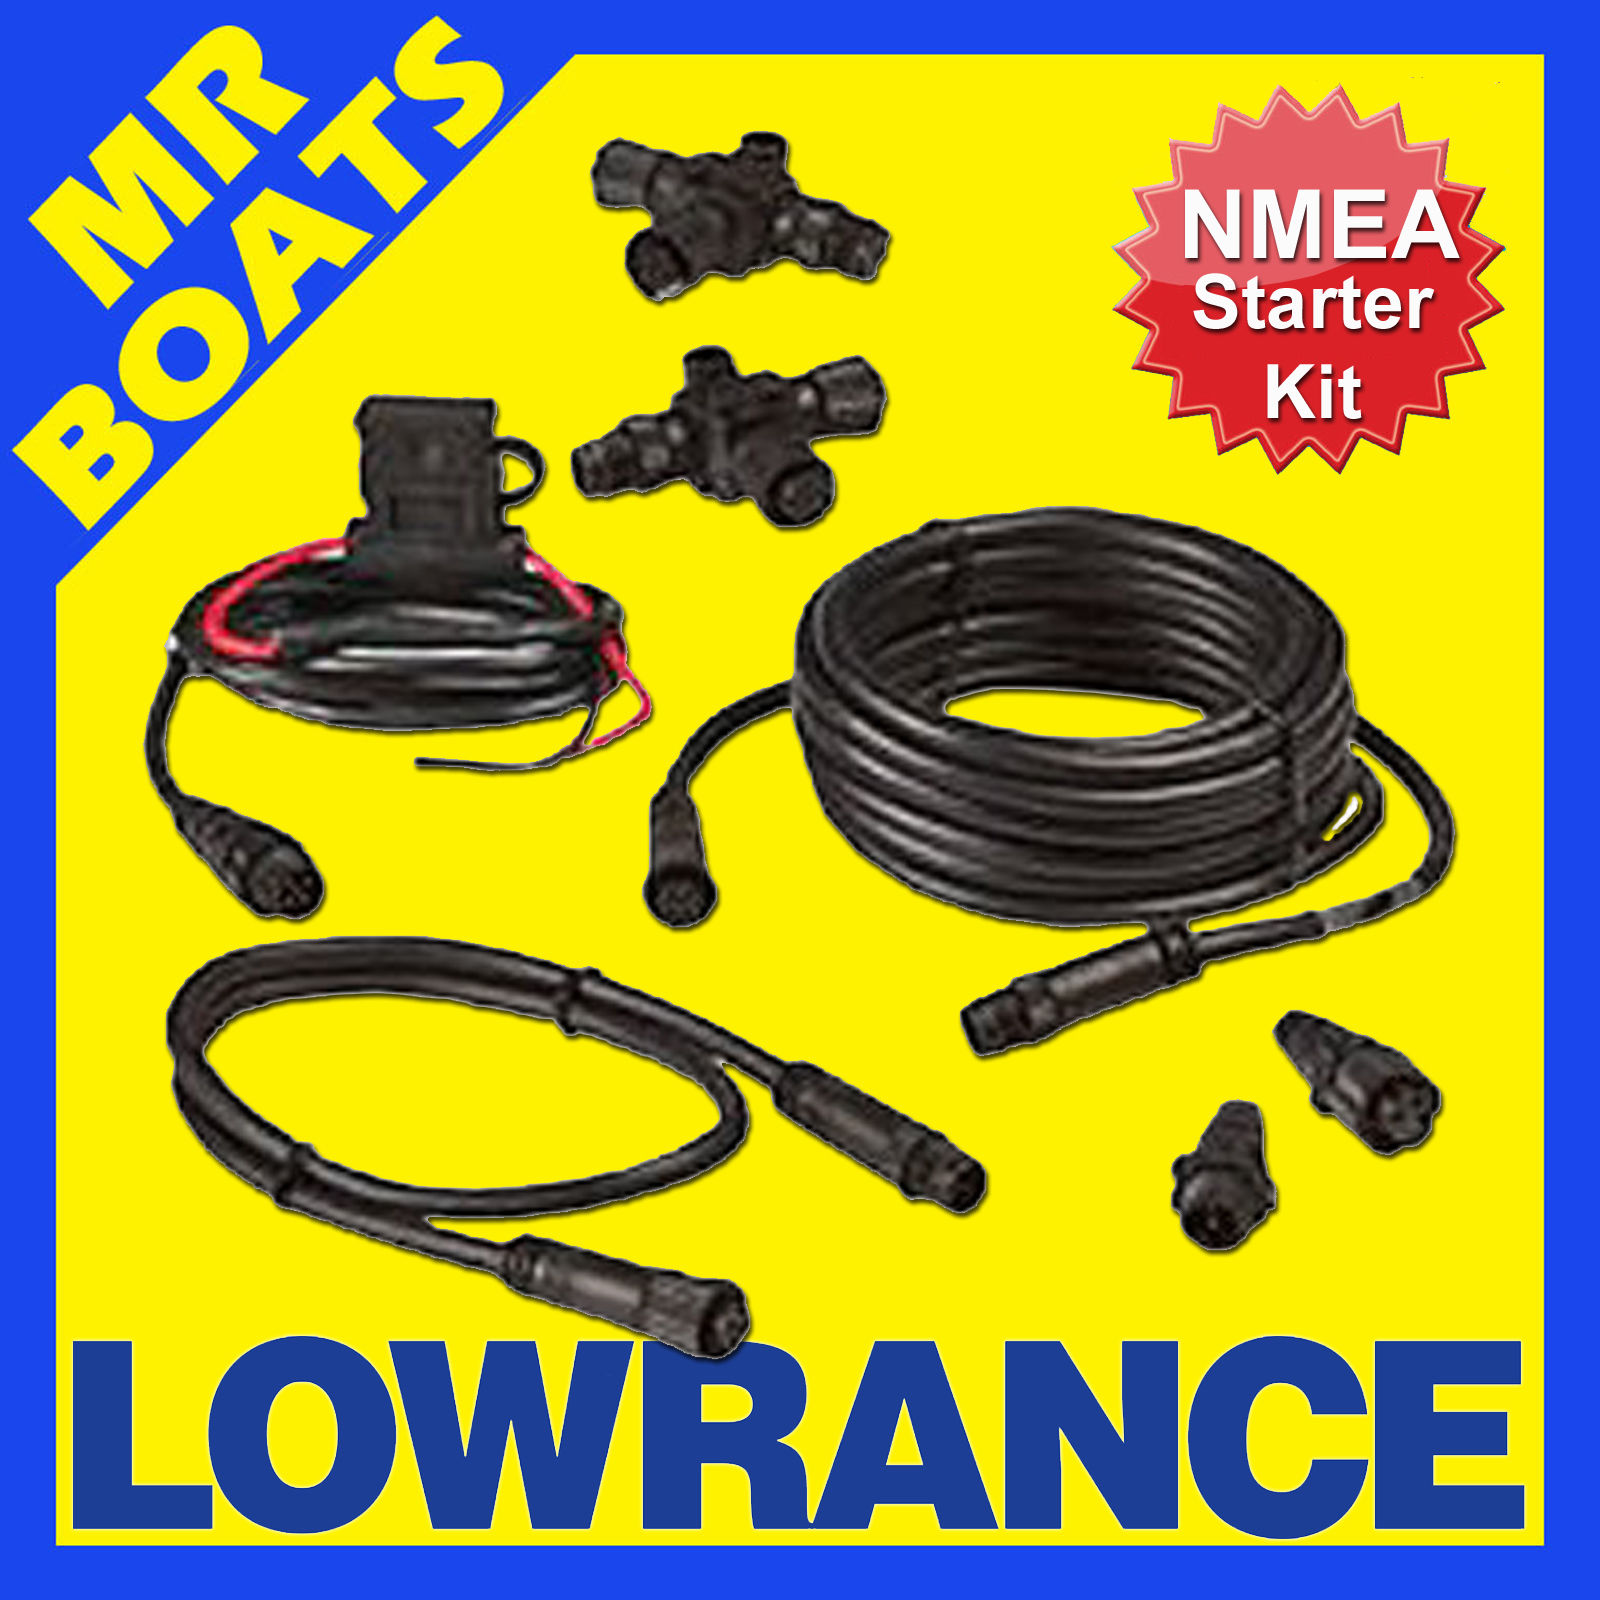 lowrance nmea 2000 network cables